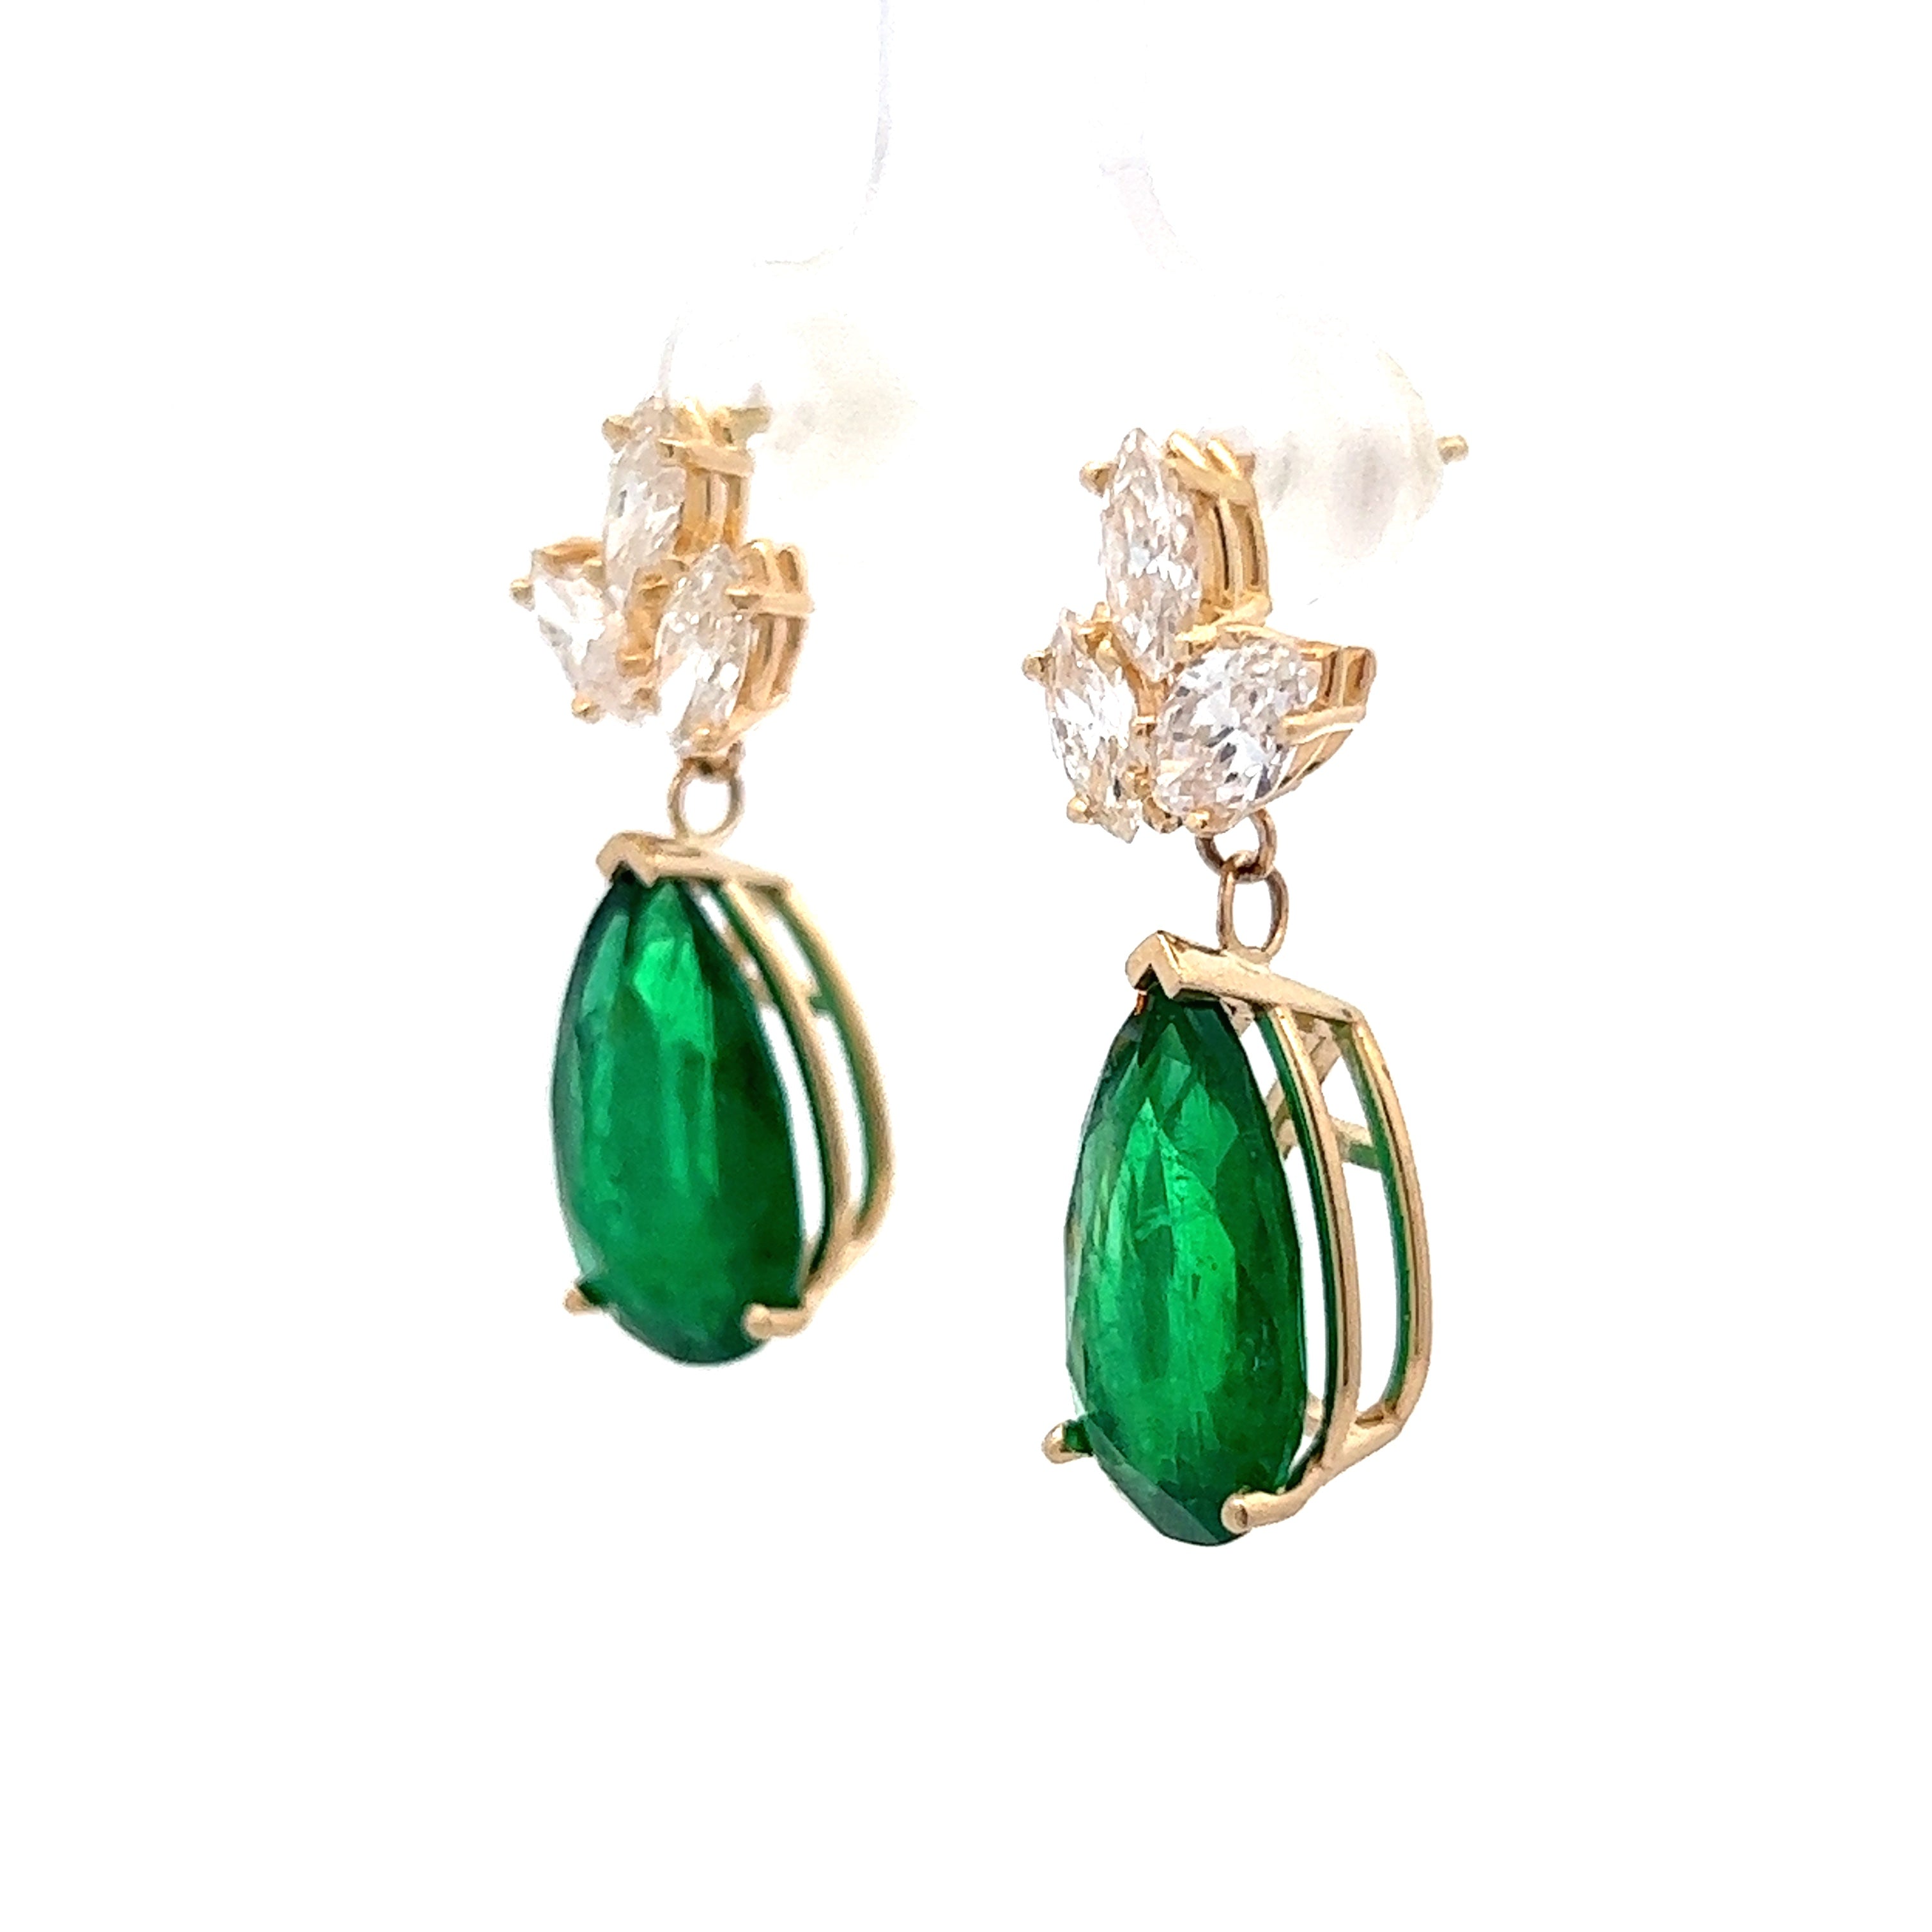 The love for long earrings with emerald -